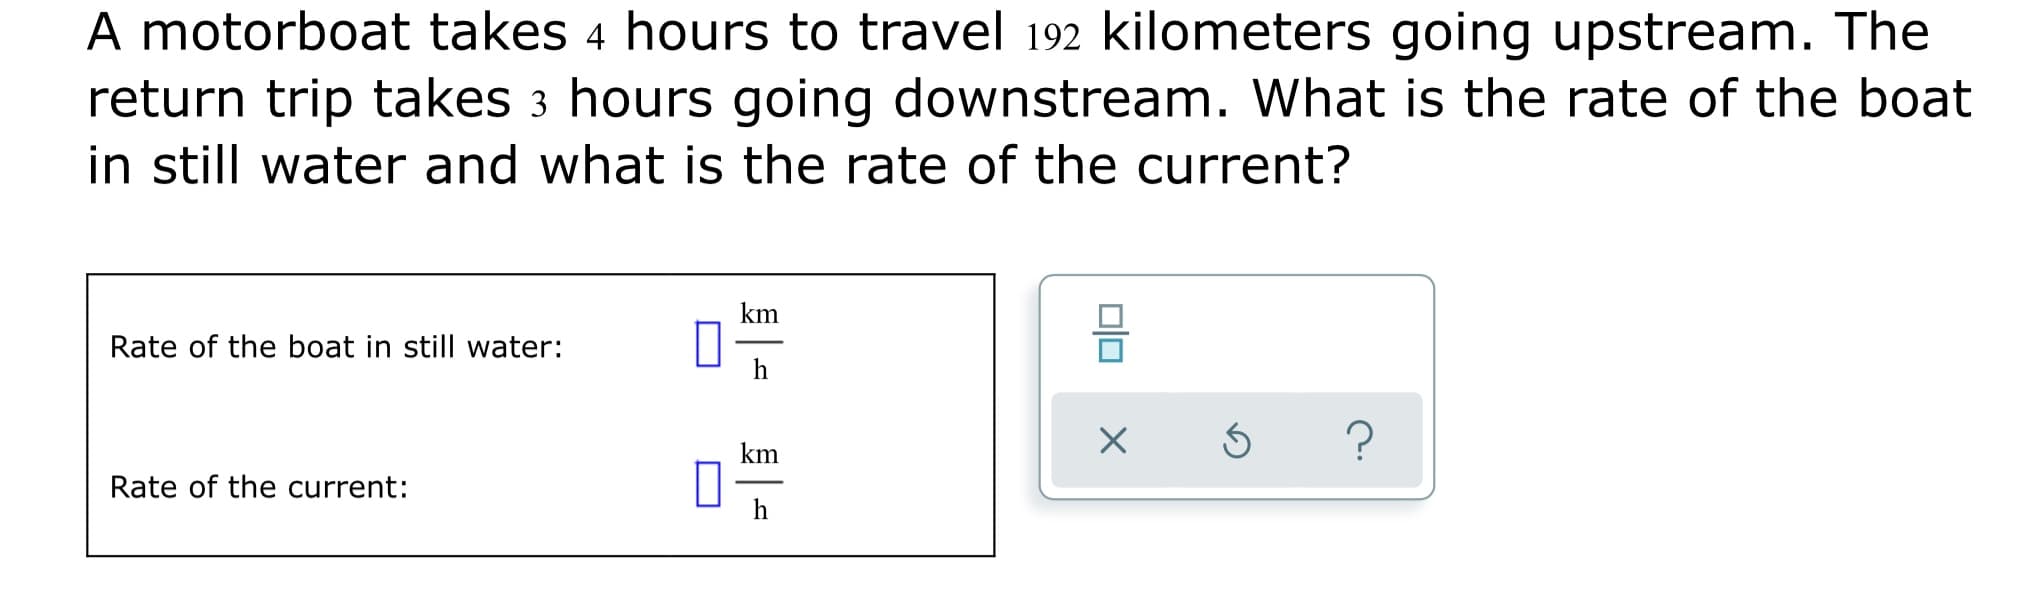 A motorboat takes 4 hours to travel 192 kilometers going upstream. The
return trip takes 3 hours going downstream. What is the rate of the boat
in still water and what is the rate of the current?
km
Rate of the boat in still water:
h
km
Rate of the current:
